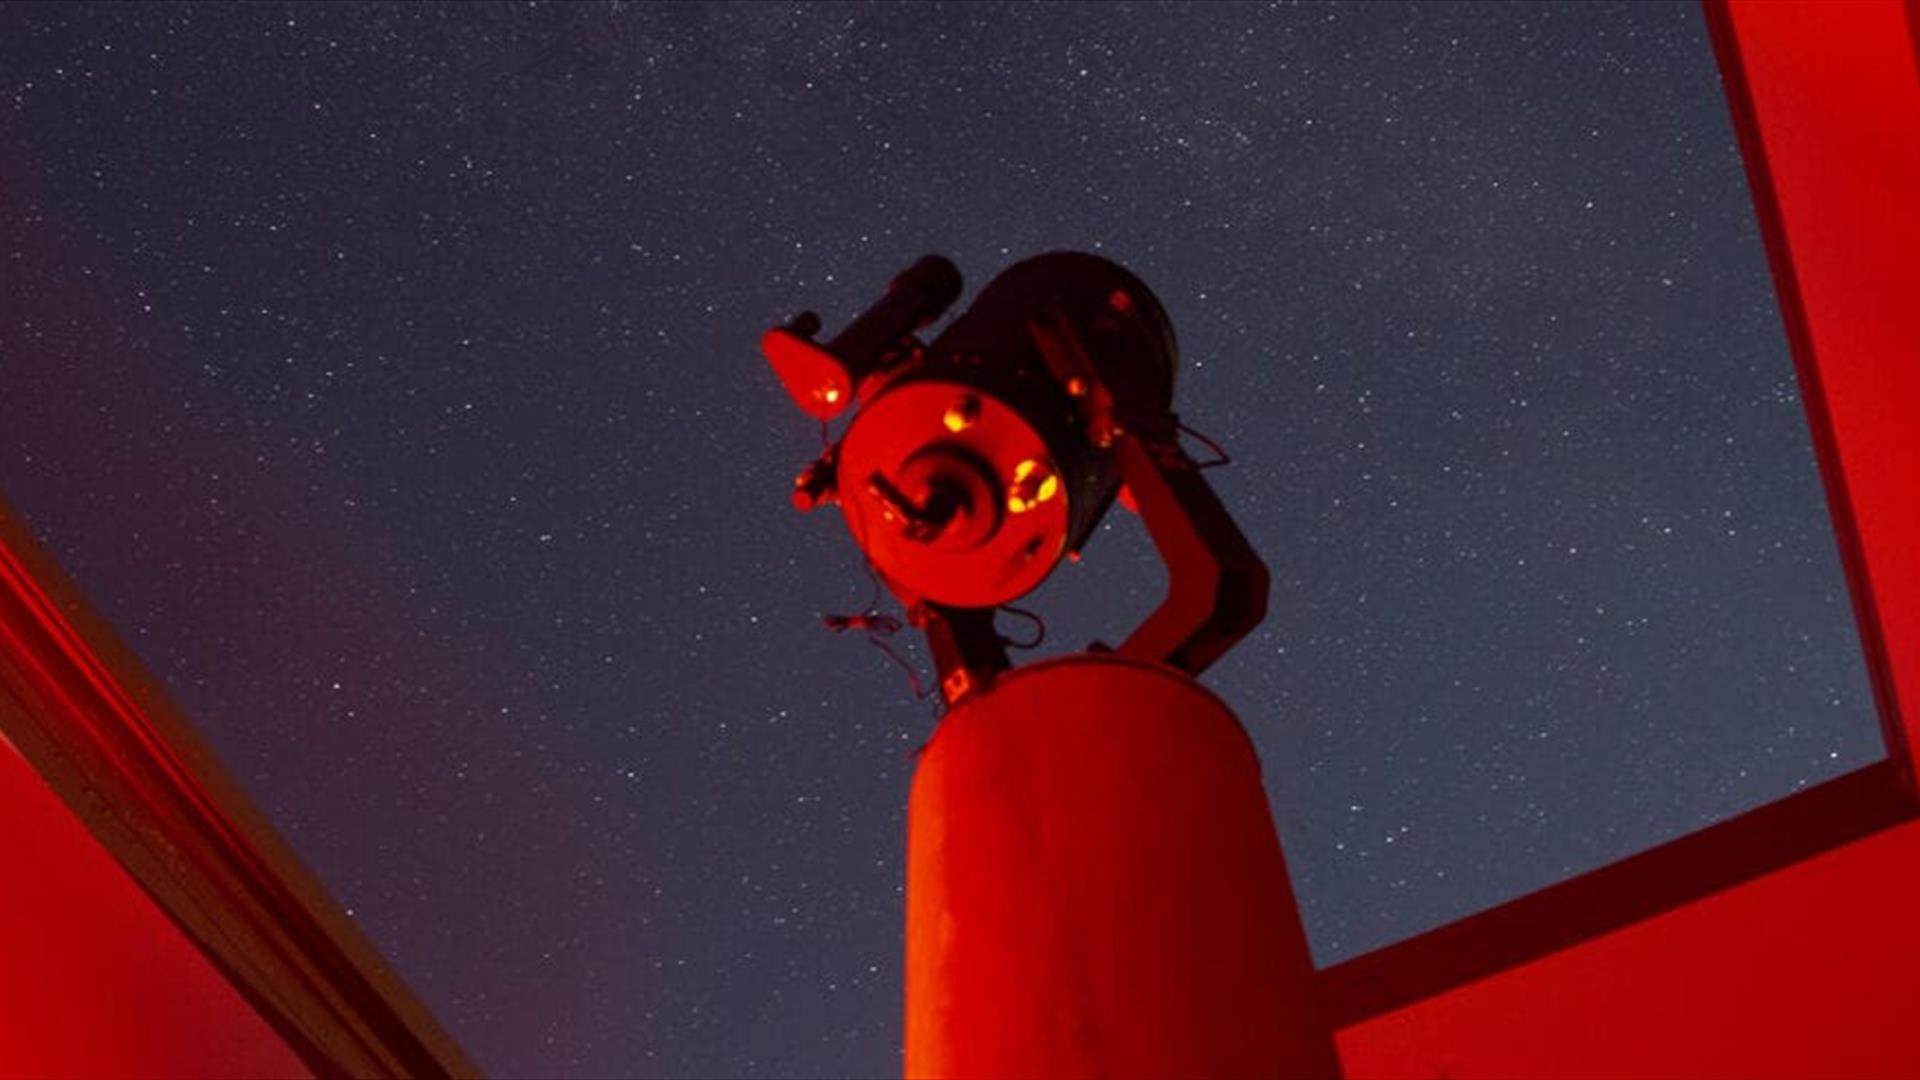 Telescope pointing through the observatory roof